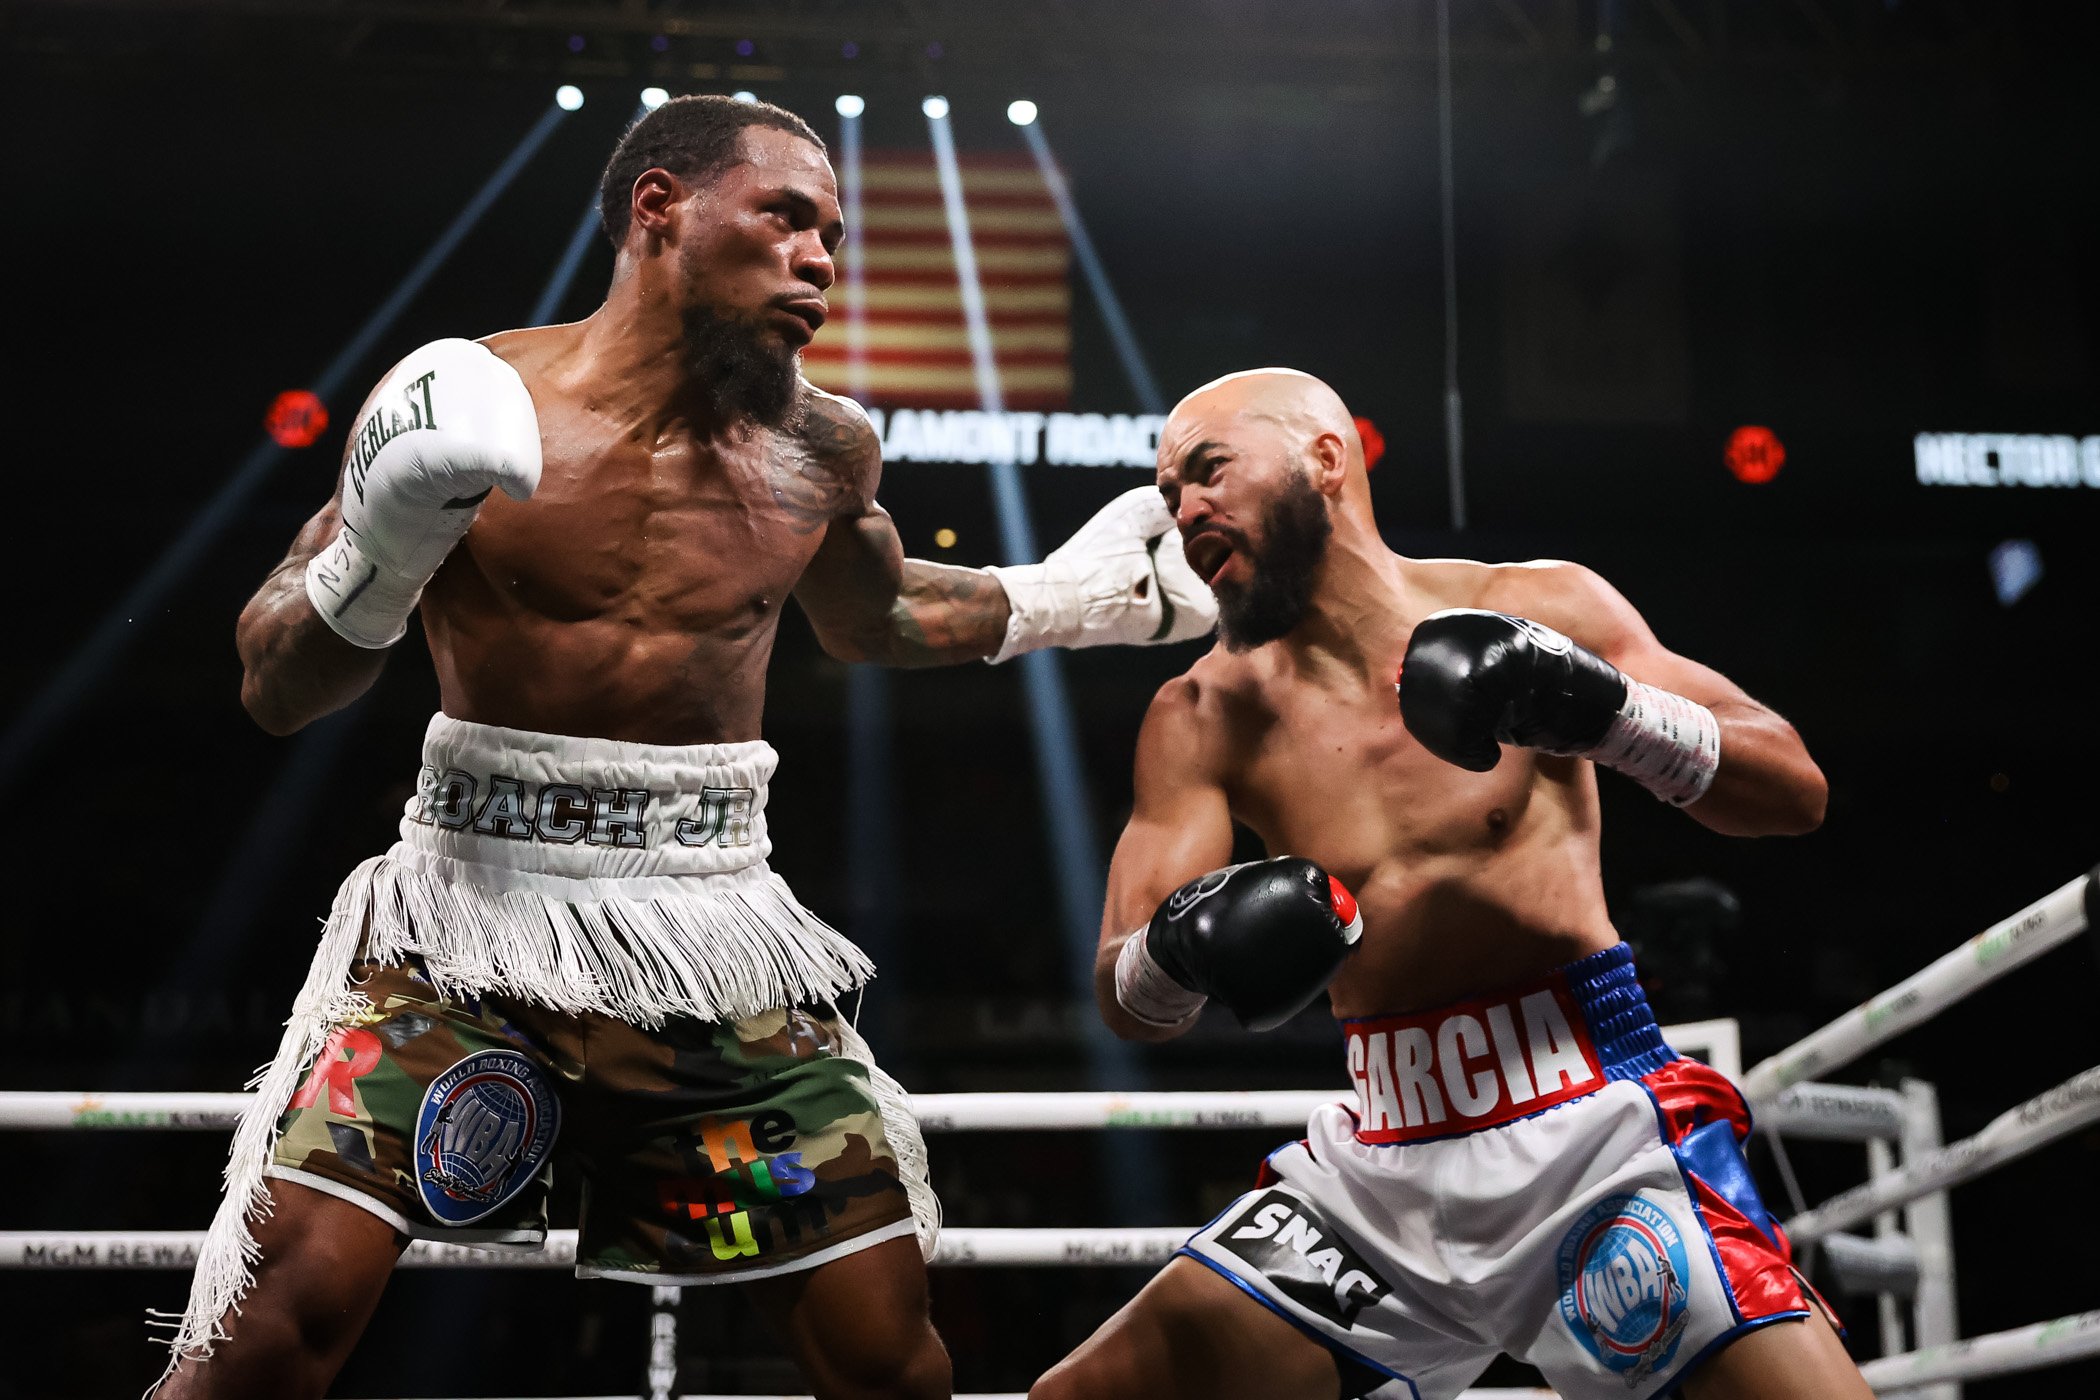 Lamont Roach Jr. gets his dream, beating Hector Garcia for the WBA junior lightweight title